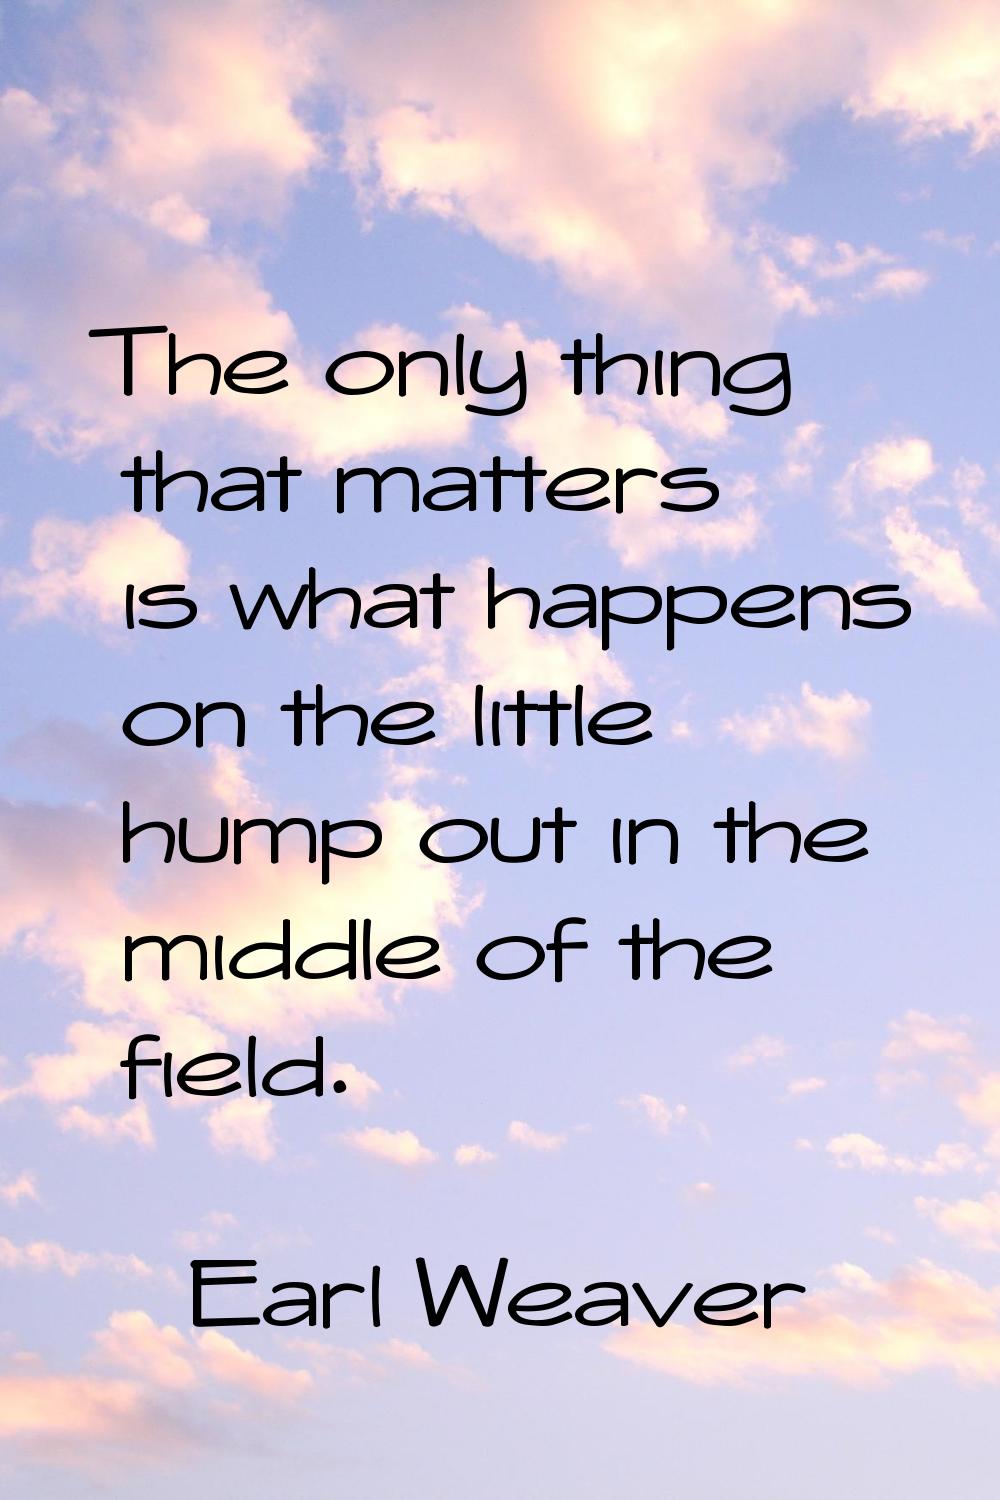 The only thing that matters is what happens on the little hump out in the middle of the field.